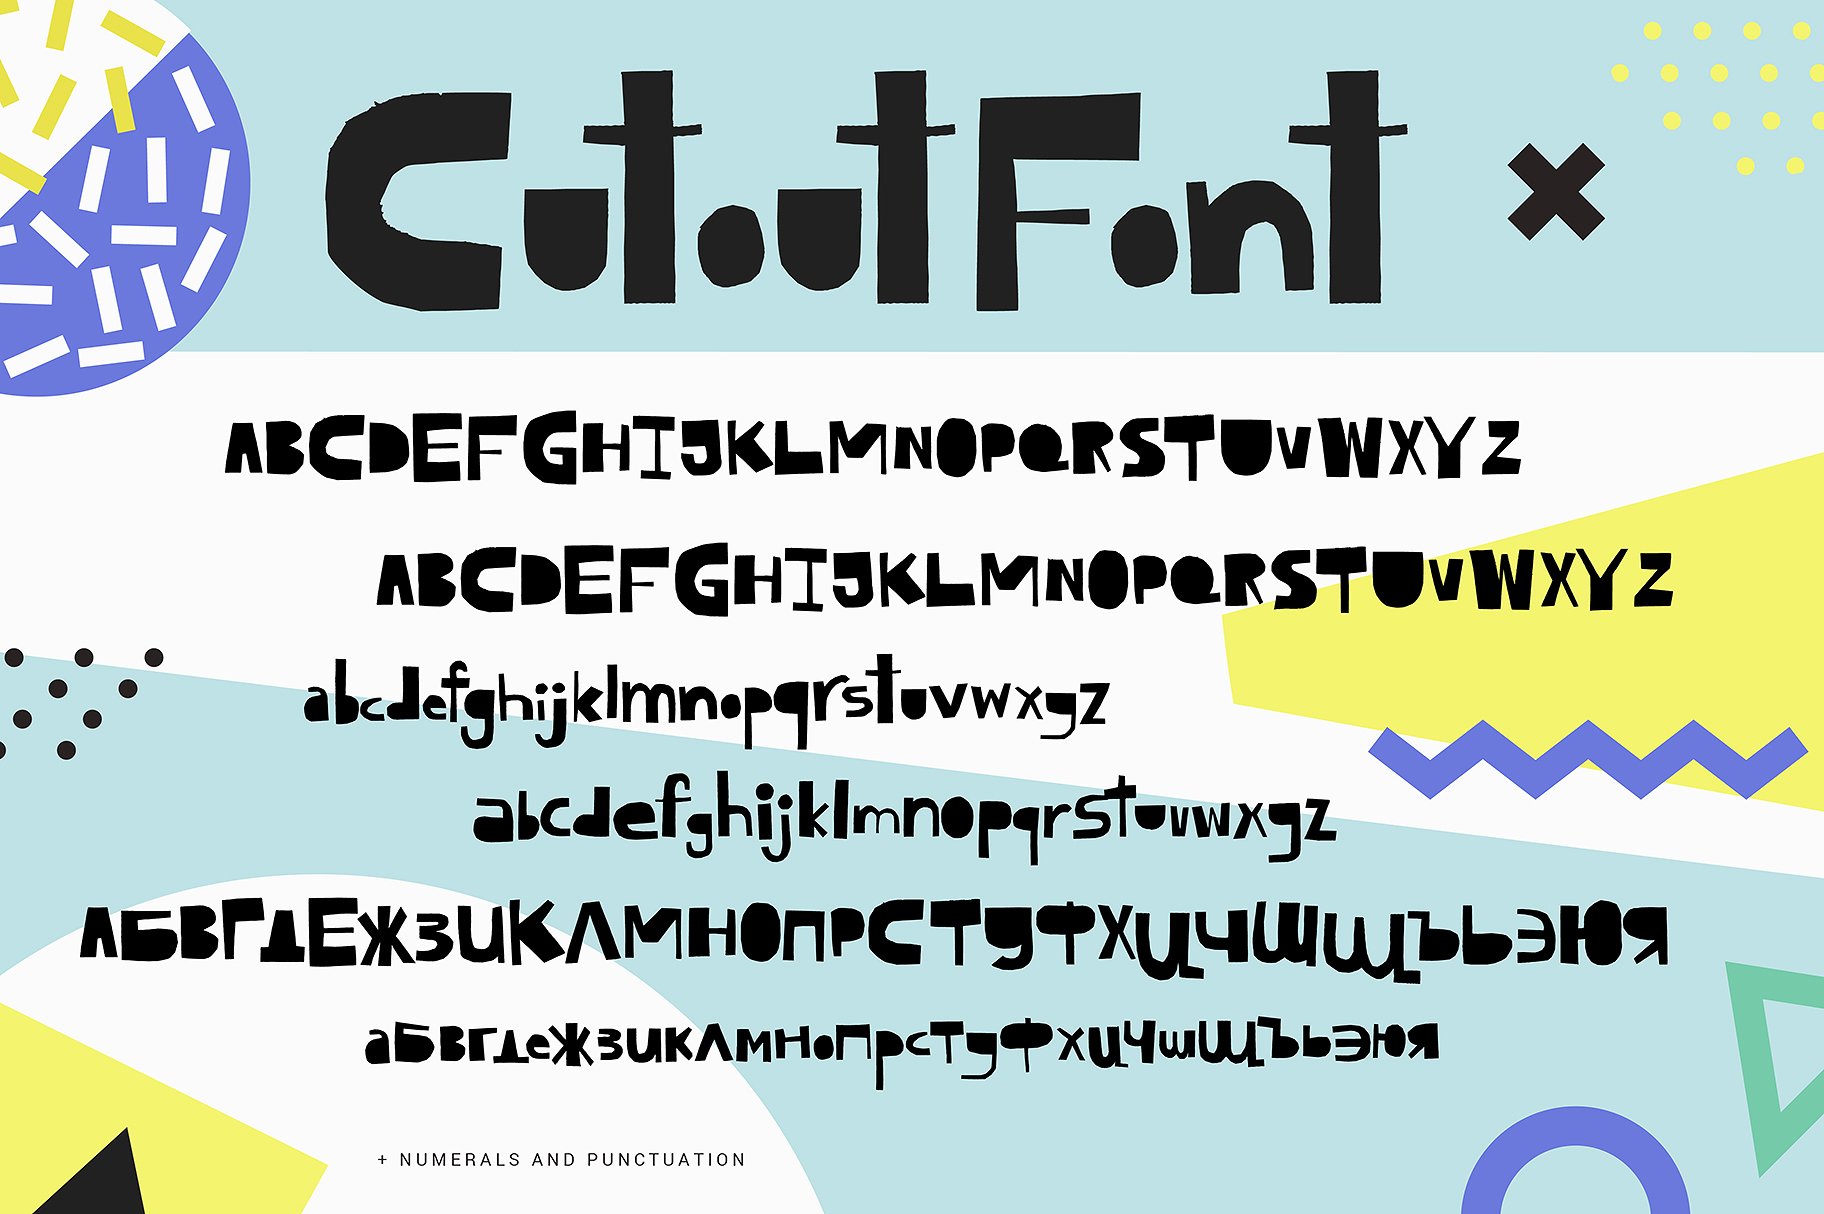 Example font Cutout New #3